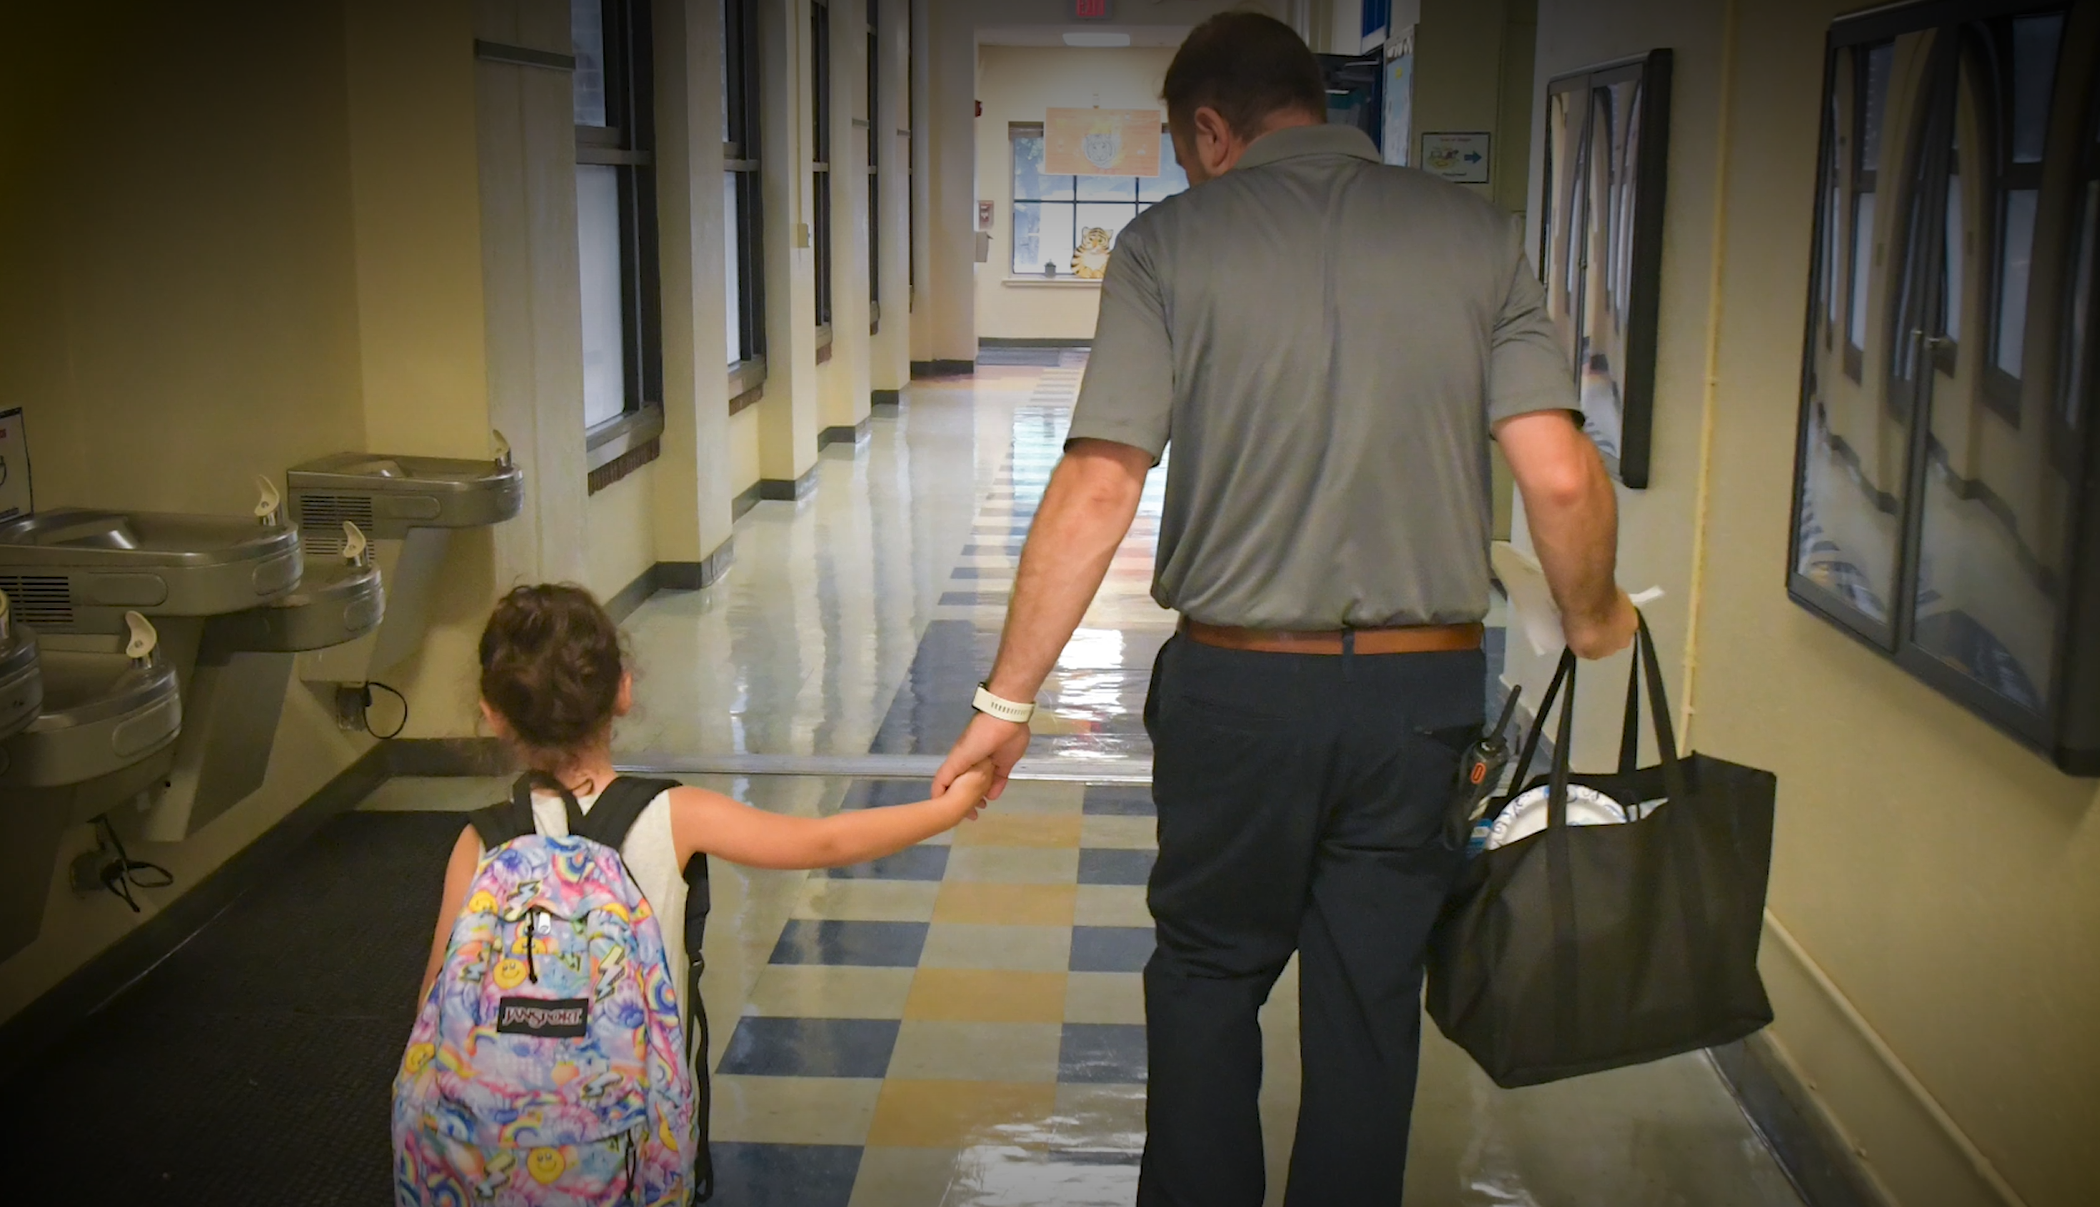 father and daughter in school hallway